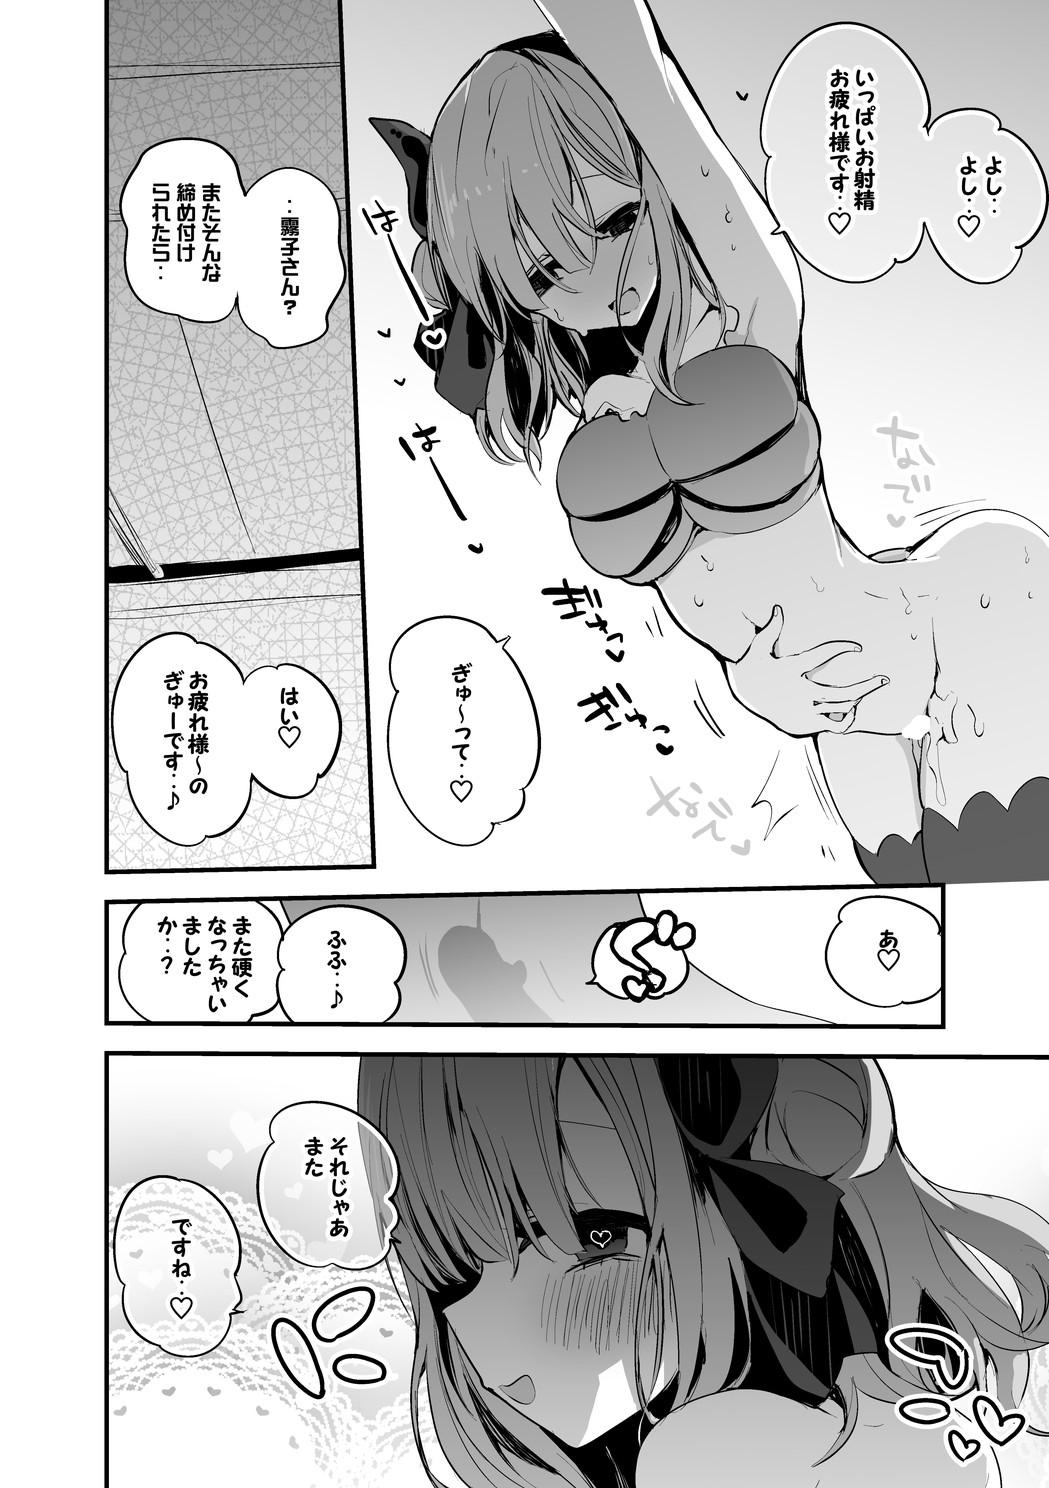 Climax 風花と麗花と着物で編 - The idolmaster Culito - Page 7